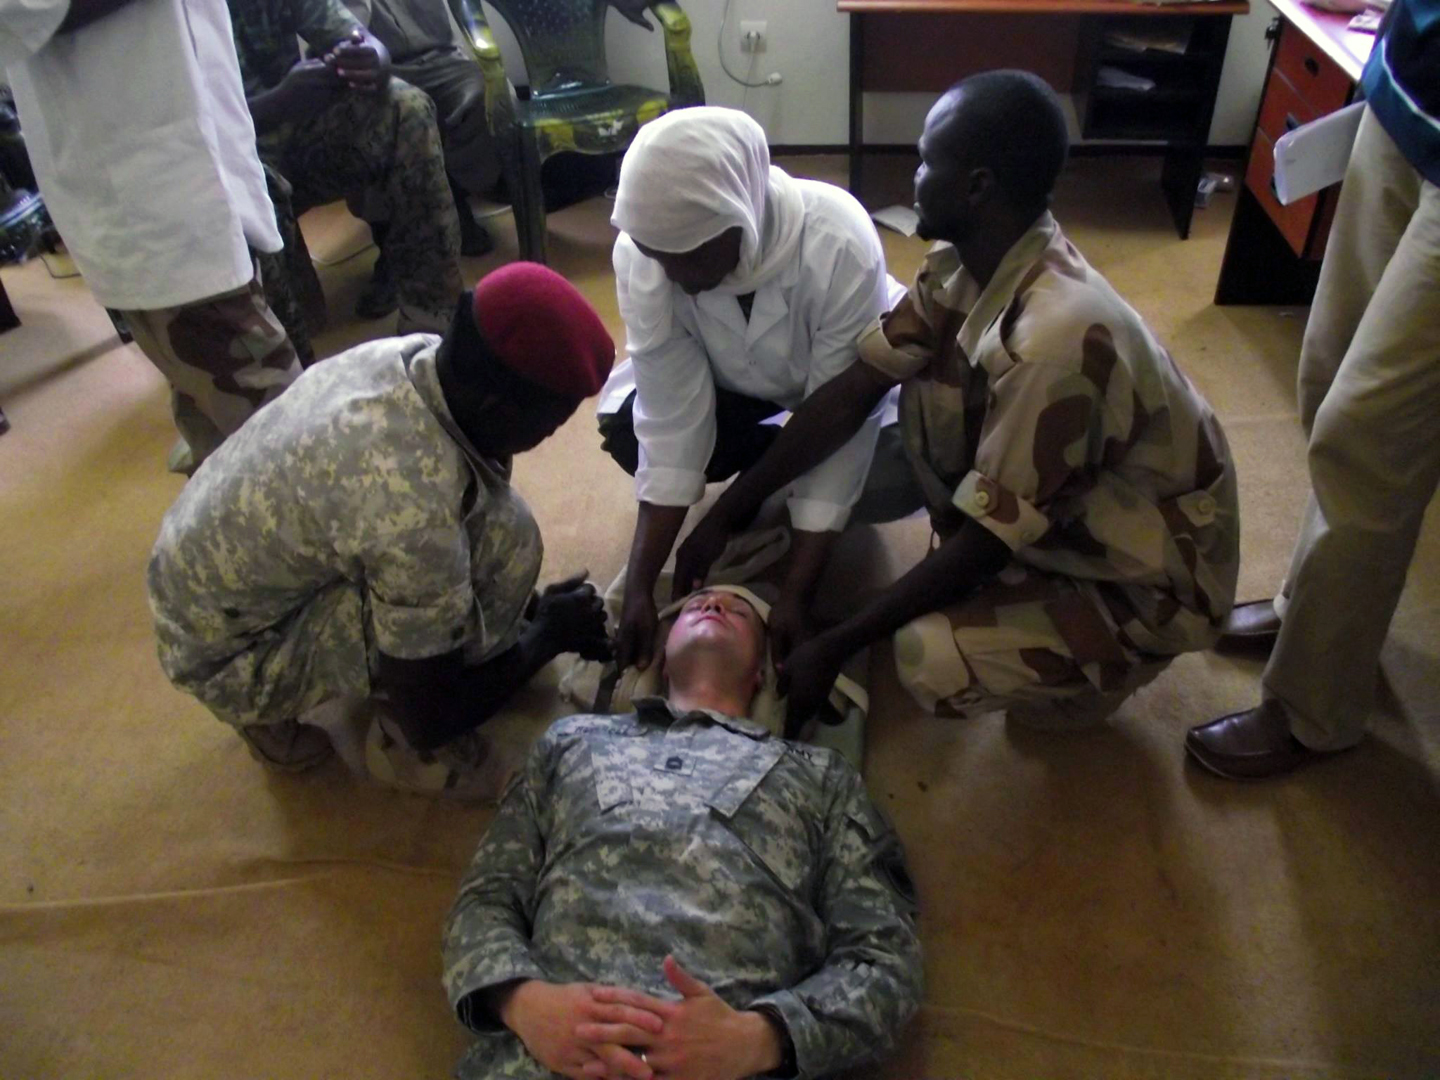 1st Sgt. Richard Russell, former operations NCO with the U.S. Army Africa Surgeon’s Office, leads a course on Tactical Combat Casualty Care for soldiers in N’Djamena, Chad, in the spring of 2014. (U.S. Army photo)